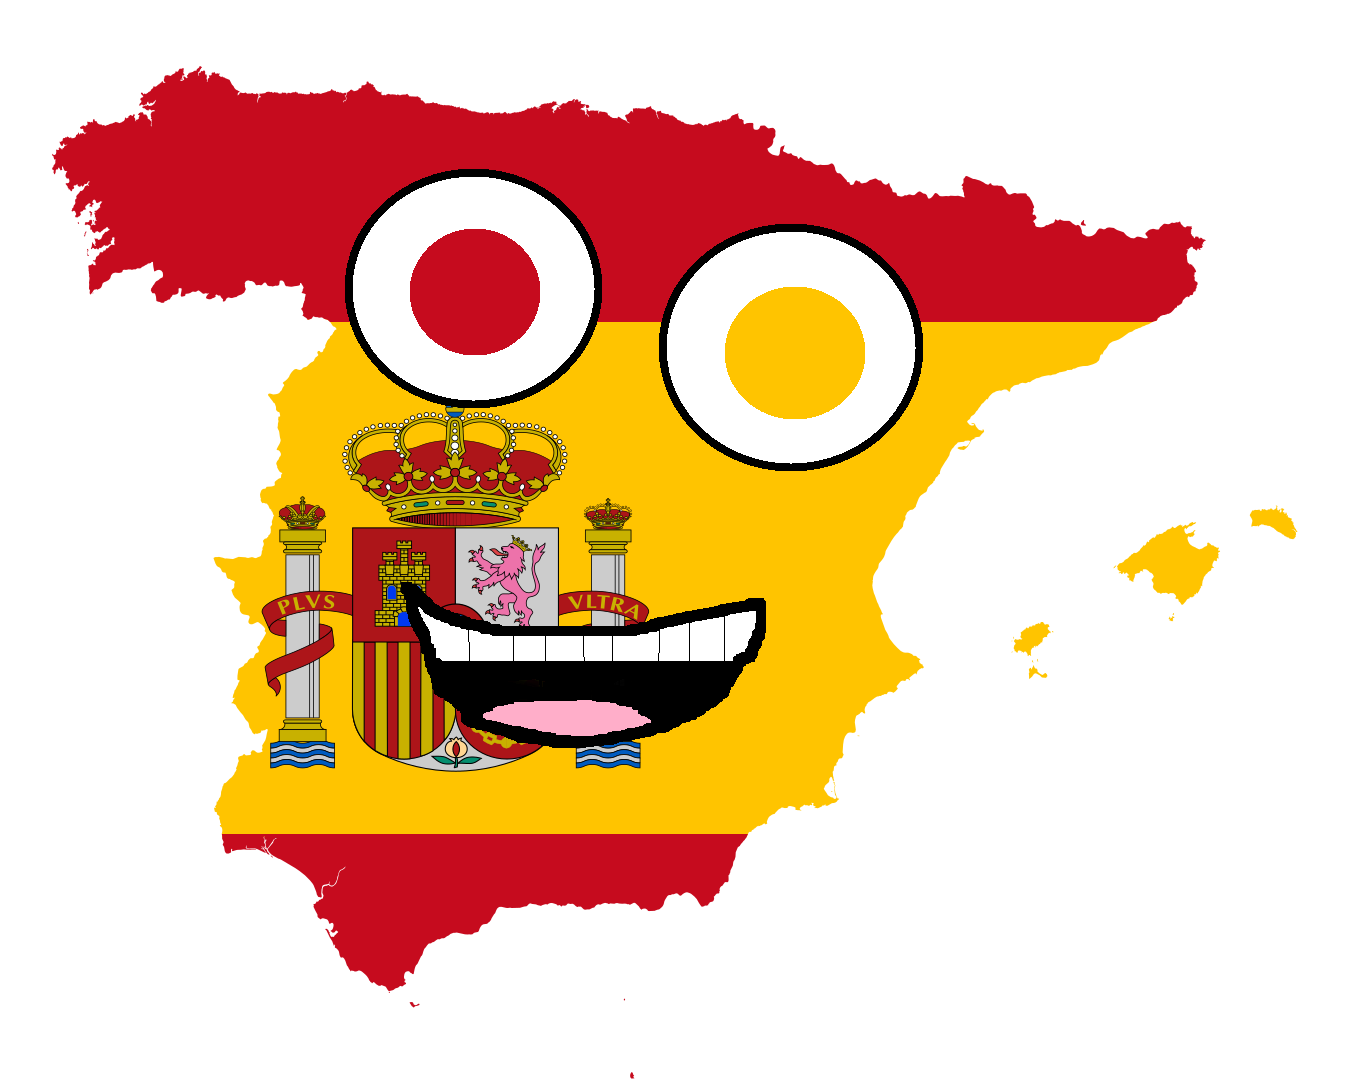 Spain character wiki